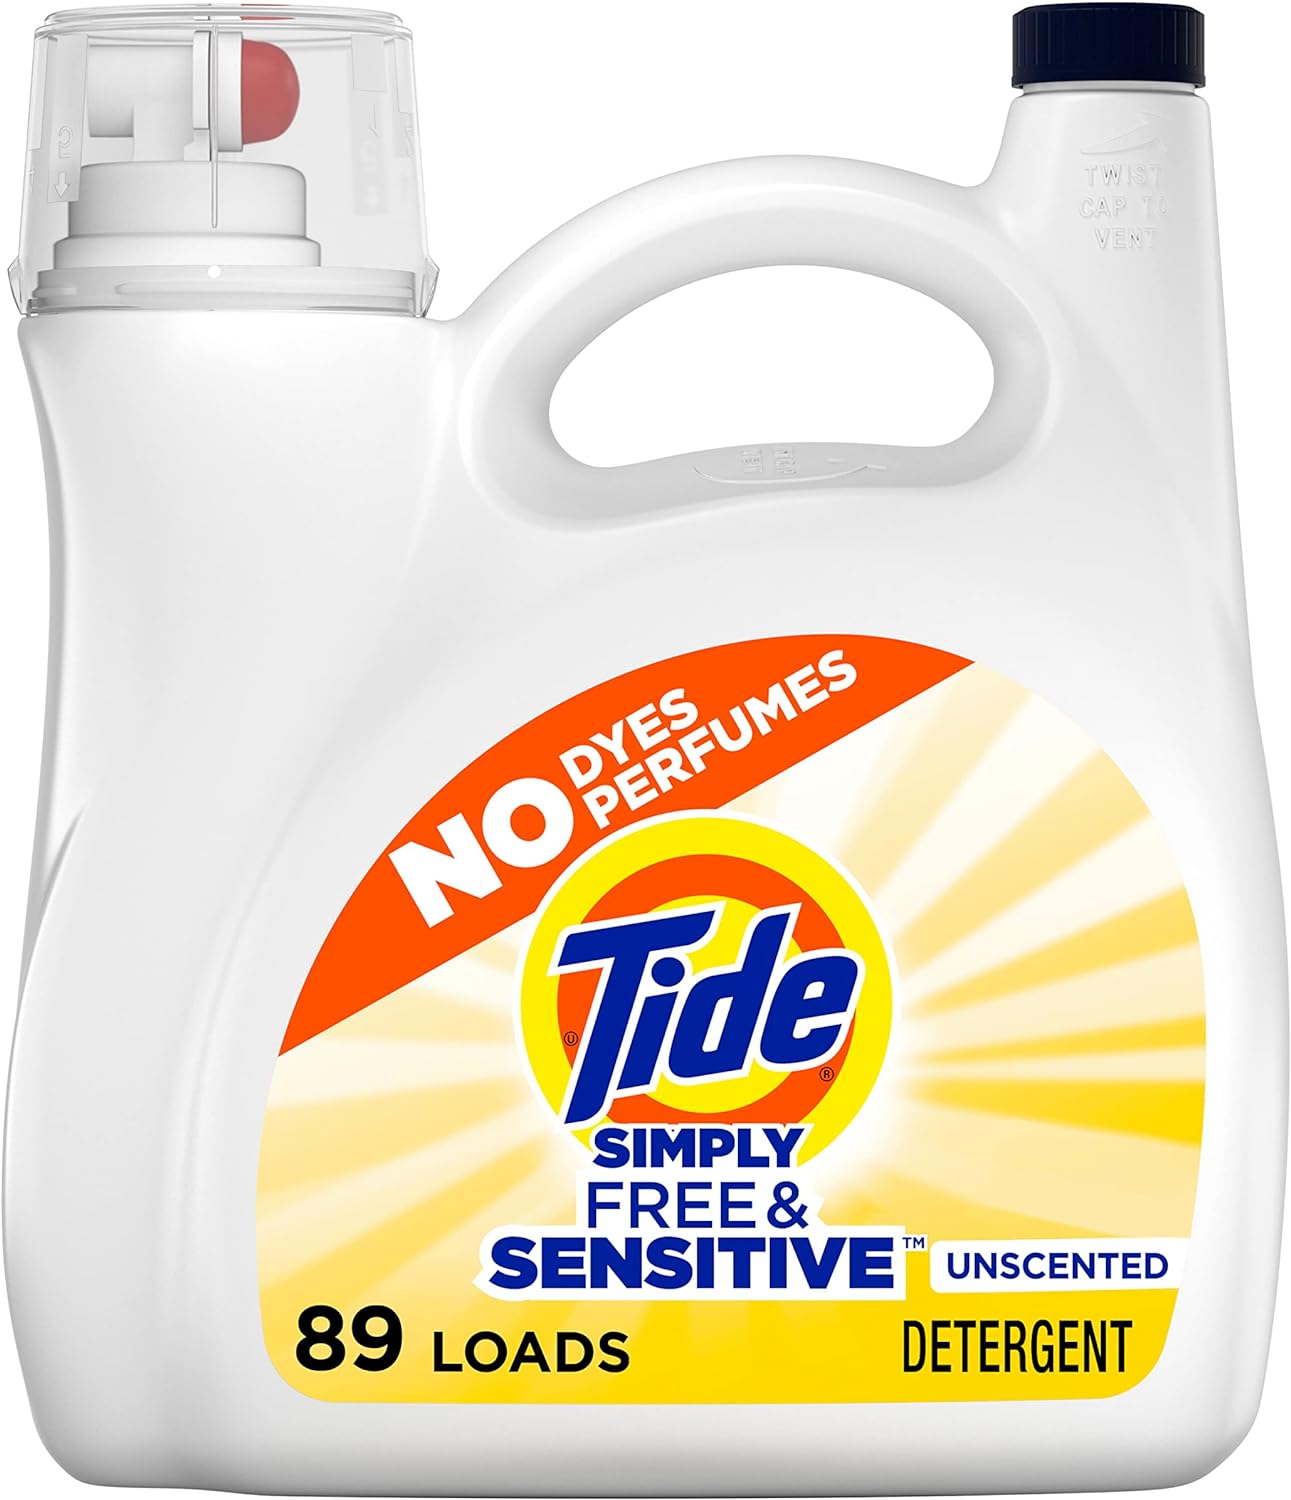 Buy 4 Simply Liquid Laundry Detergent, Free & Sensitive, 128 Oz, 89 Loads for $ 34.67